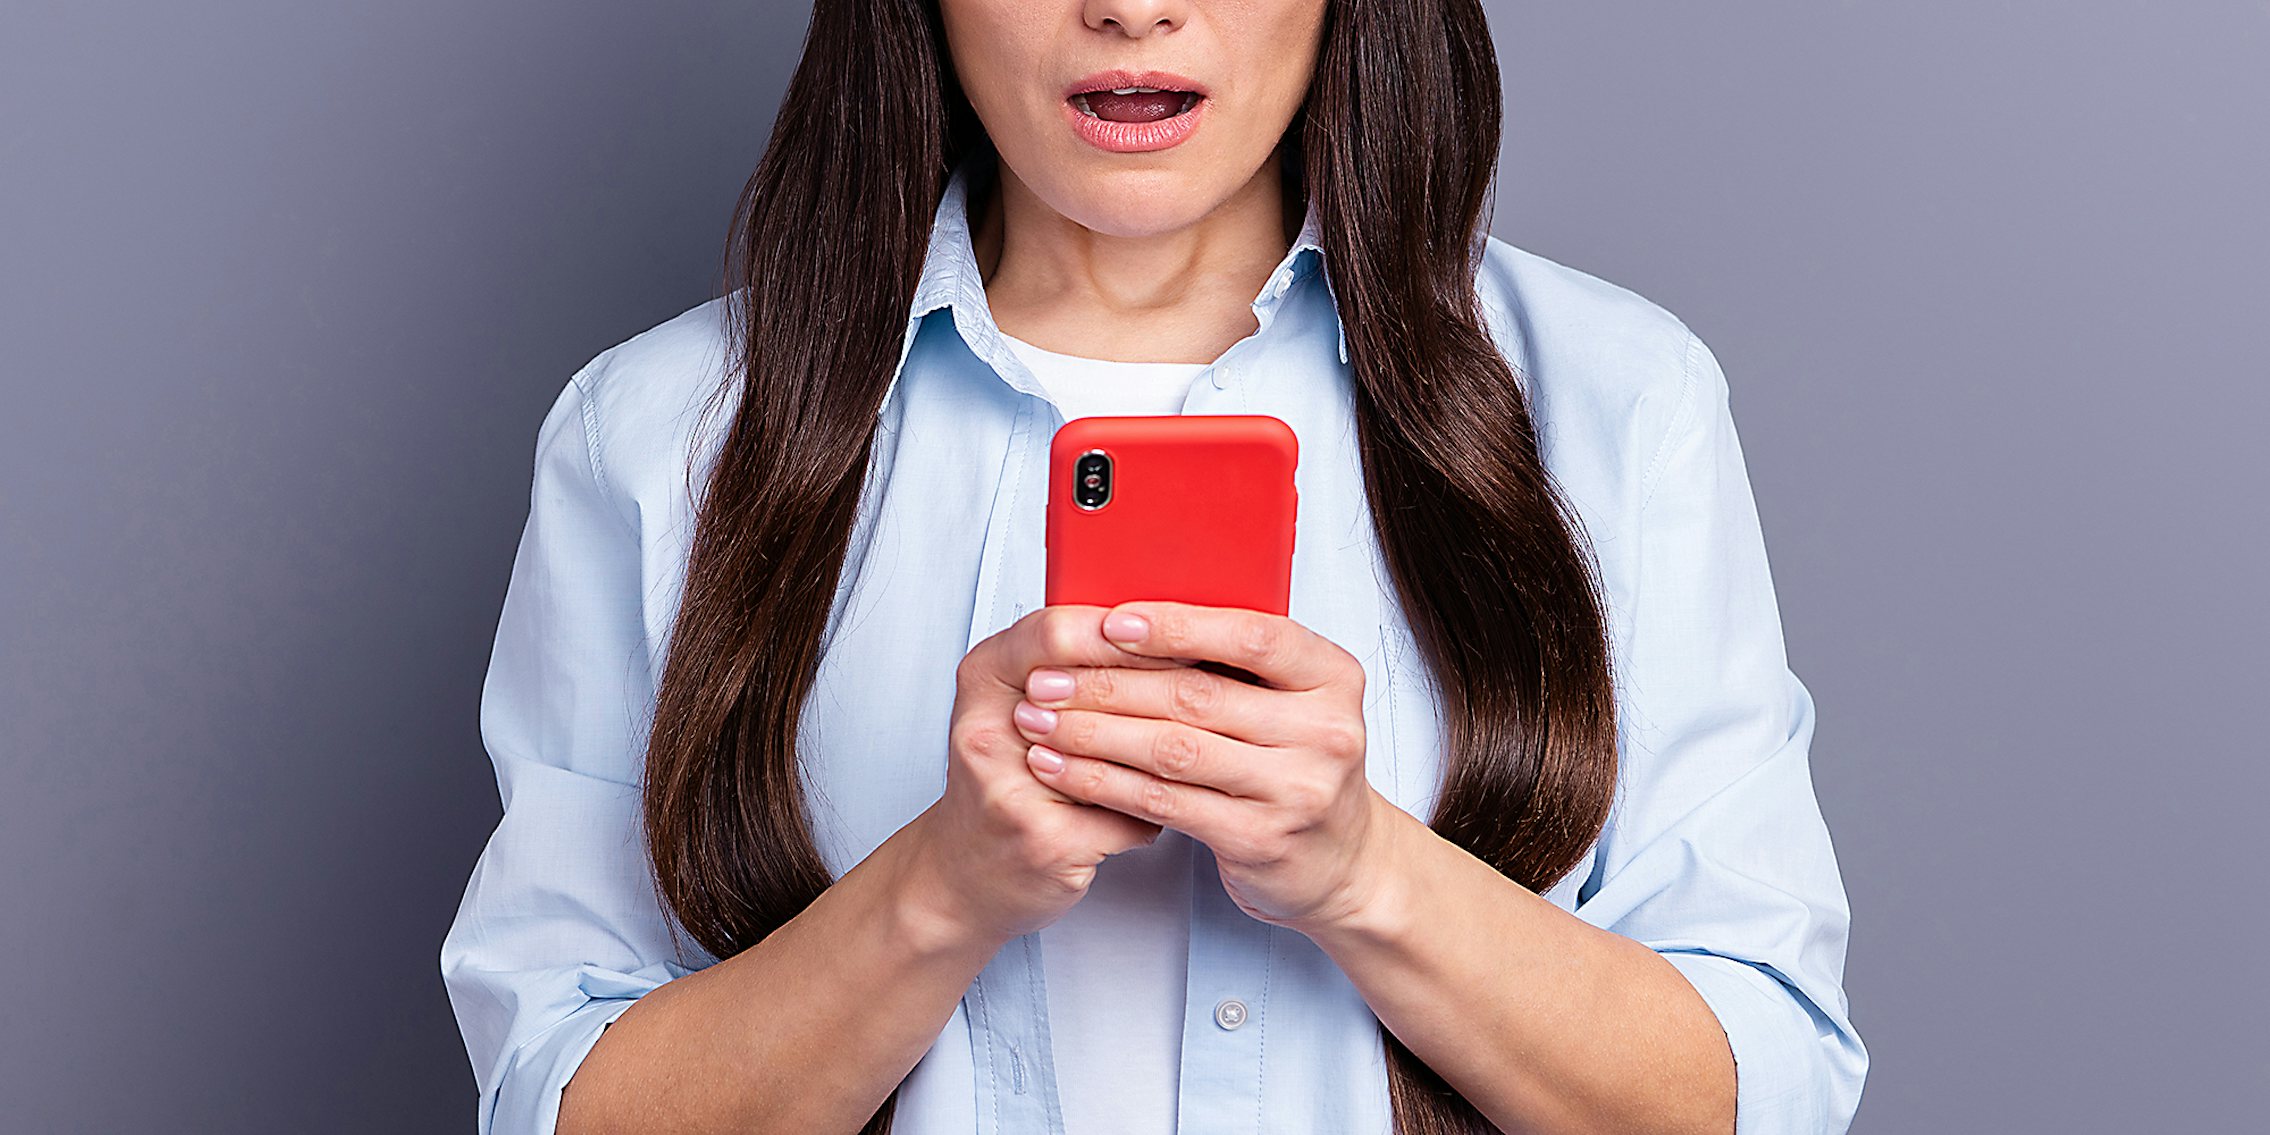 A woman in shock holding a phone.